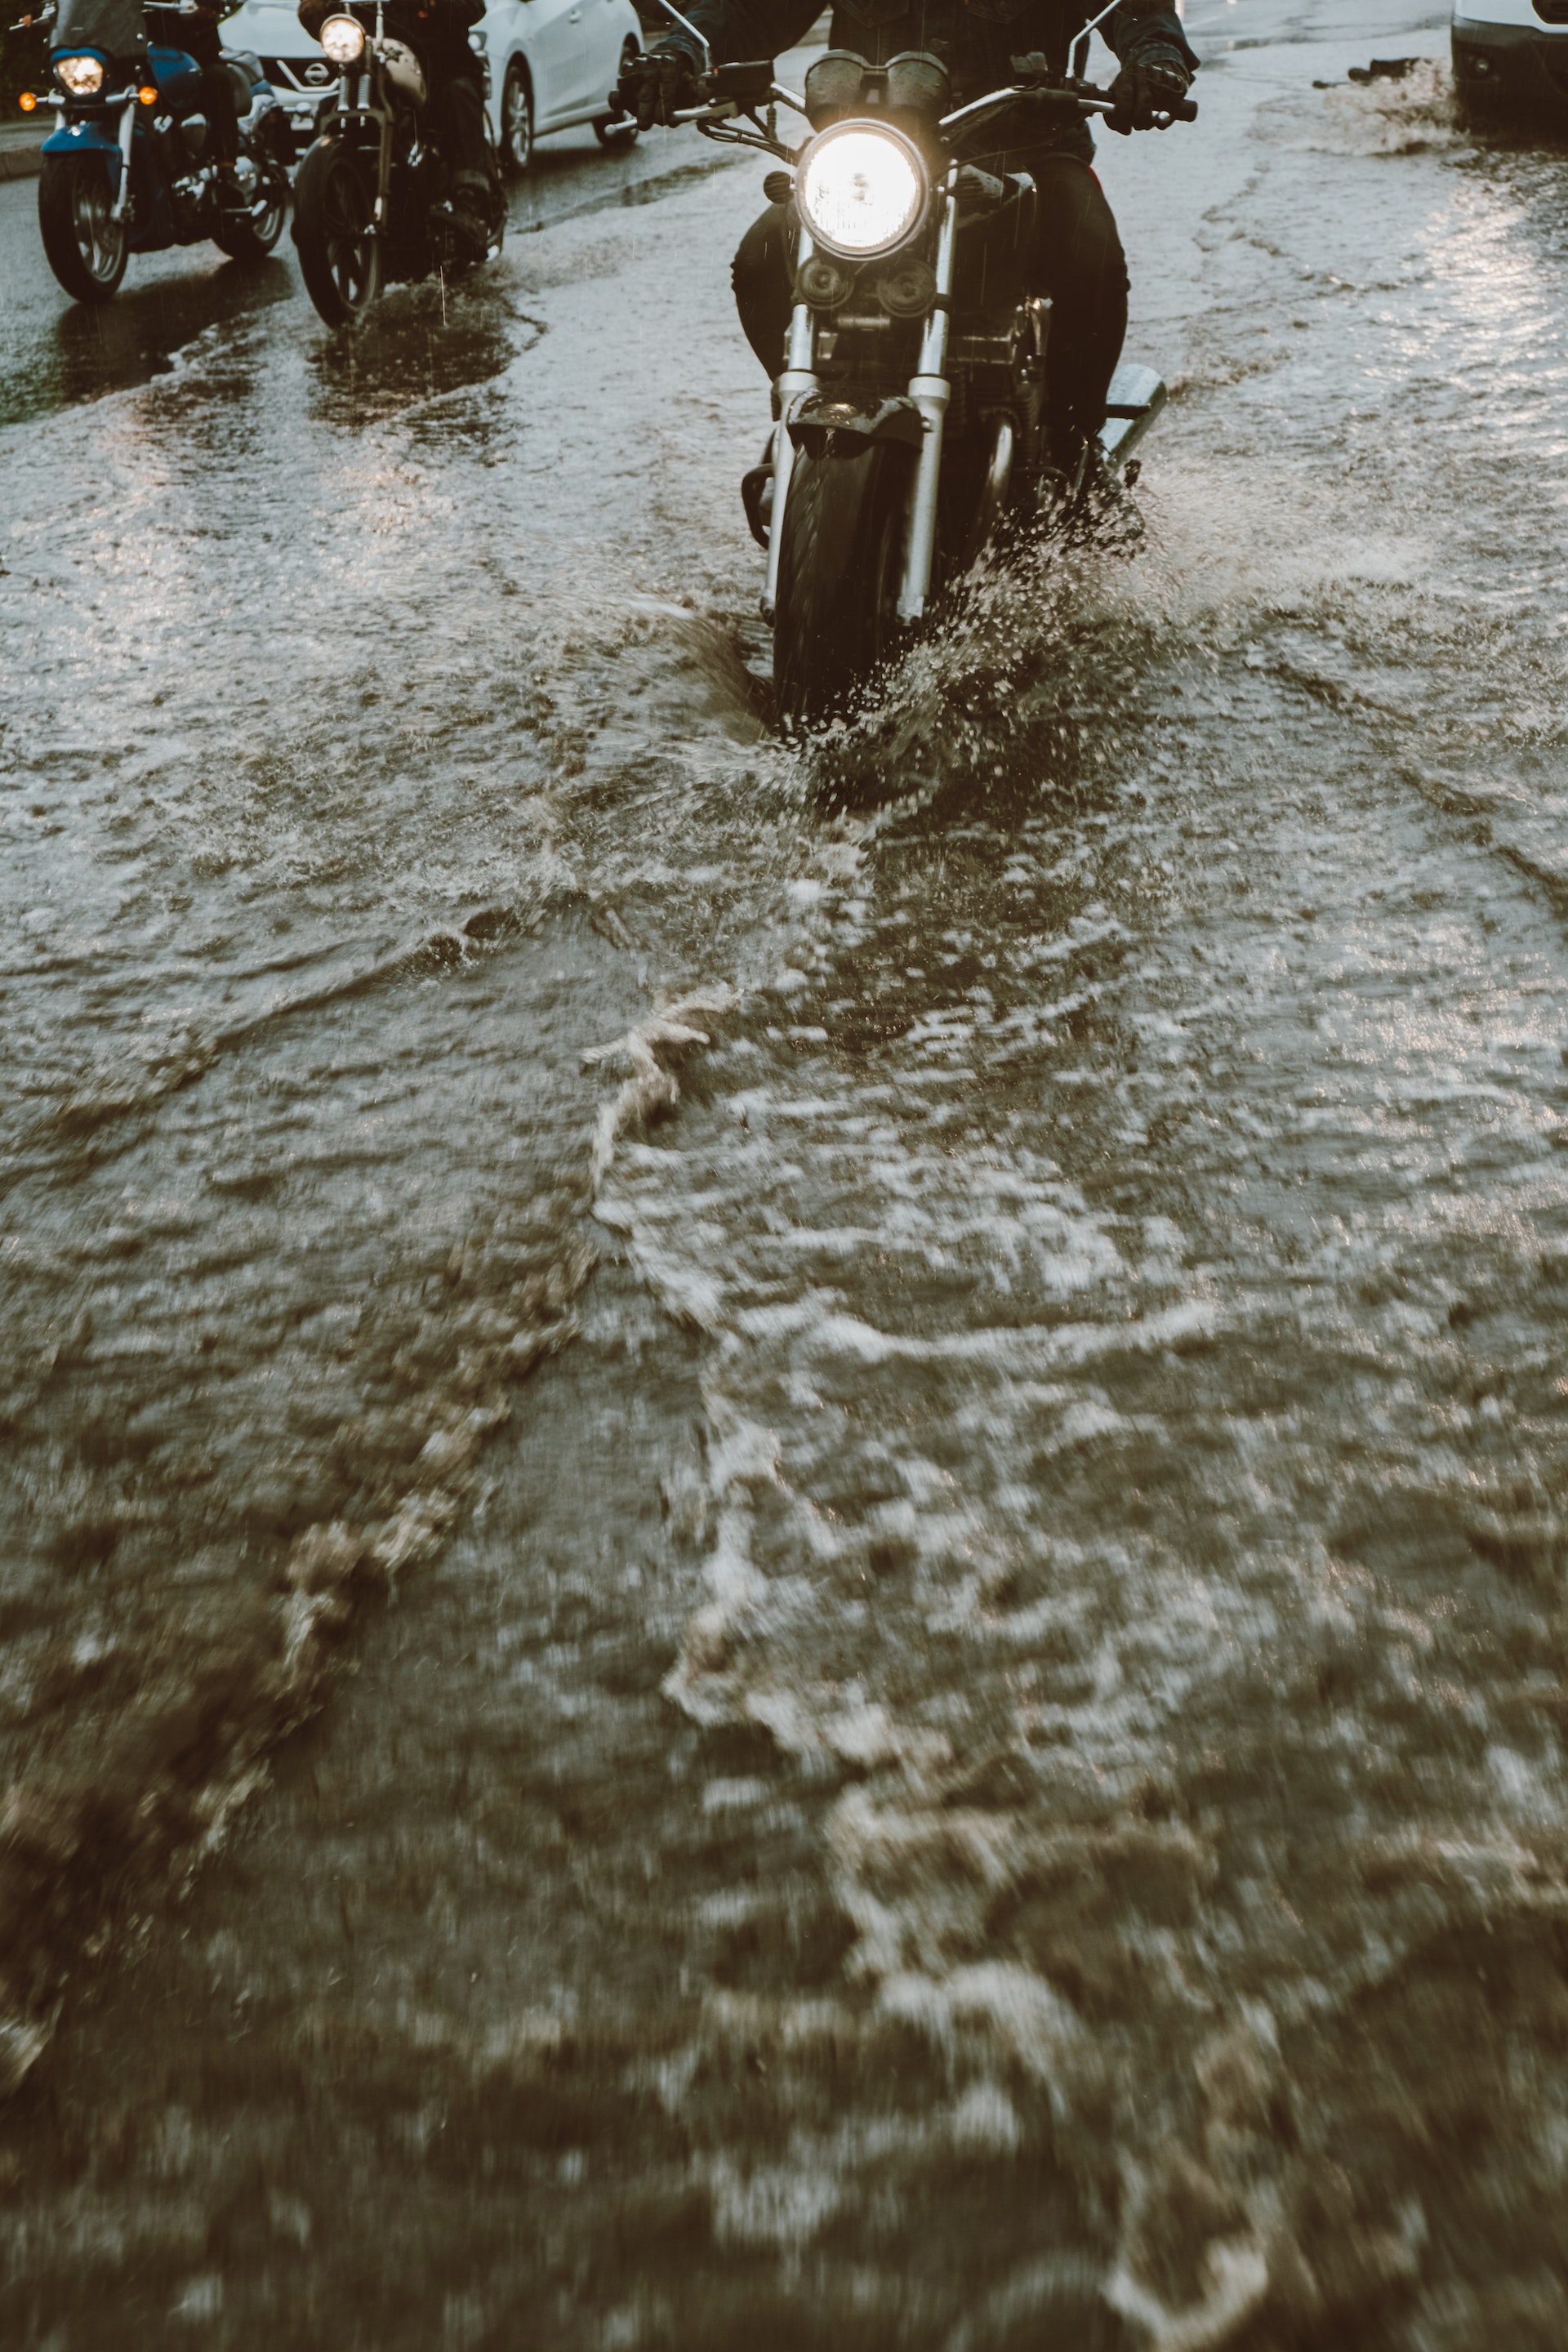 A flooded road | Source: Pexels